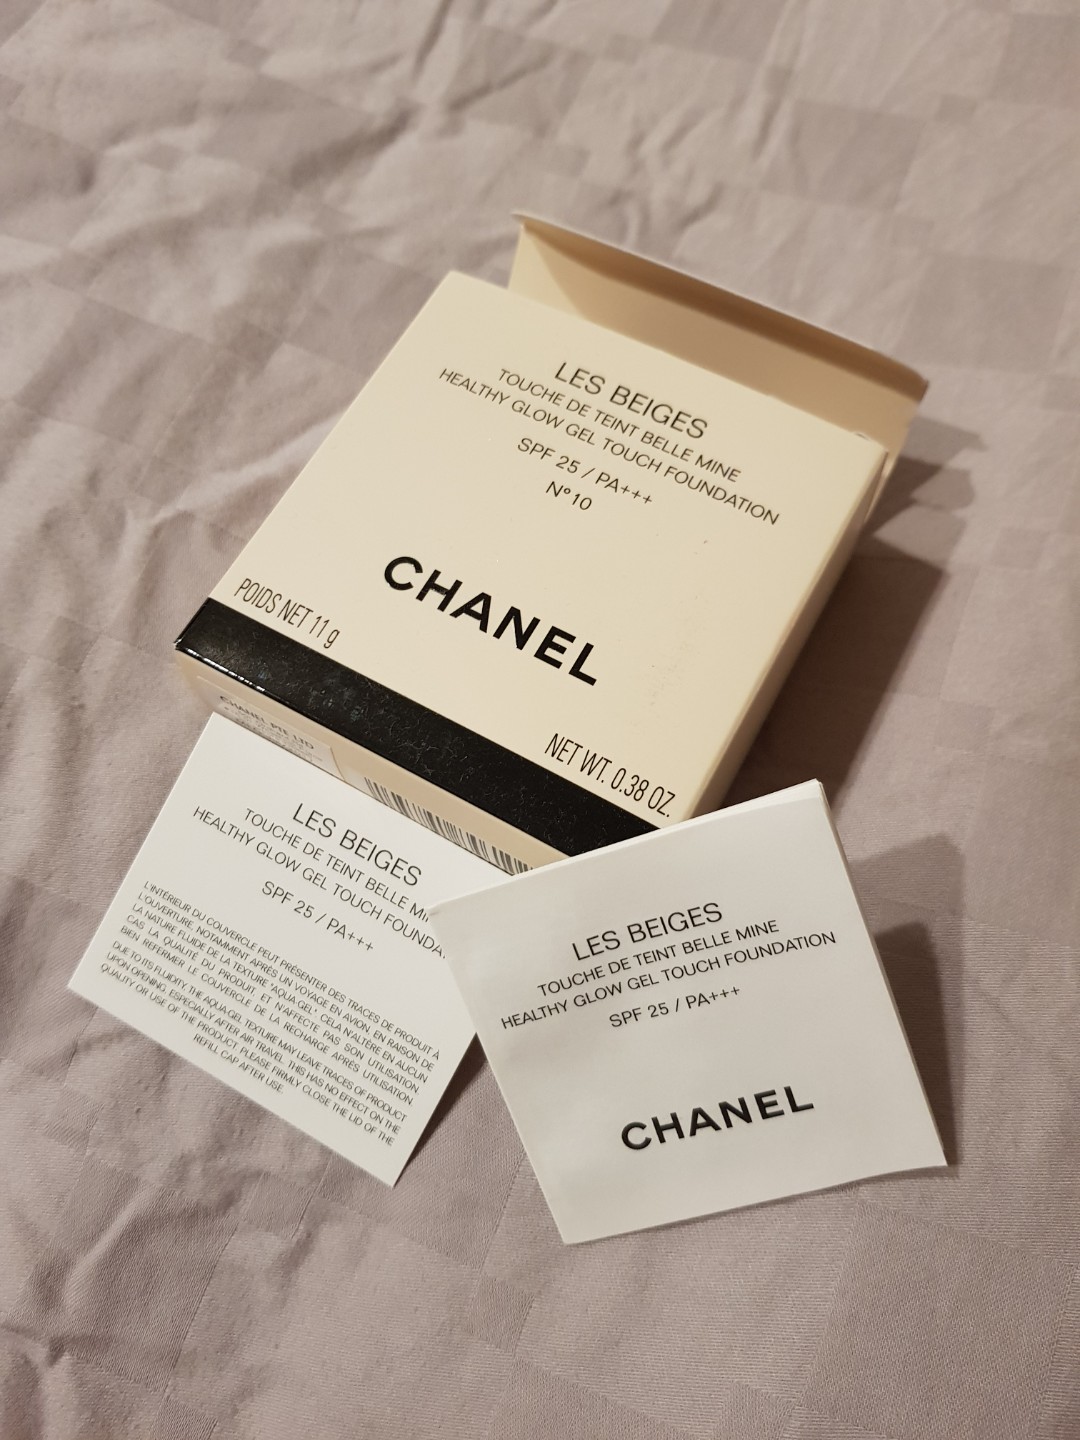 Chanel Les Beiges Touche de Teint Belle Mine Healthy Glow Gel Touch  Foundation SPF 25 PA +++ Container holder, puff and box ONLY